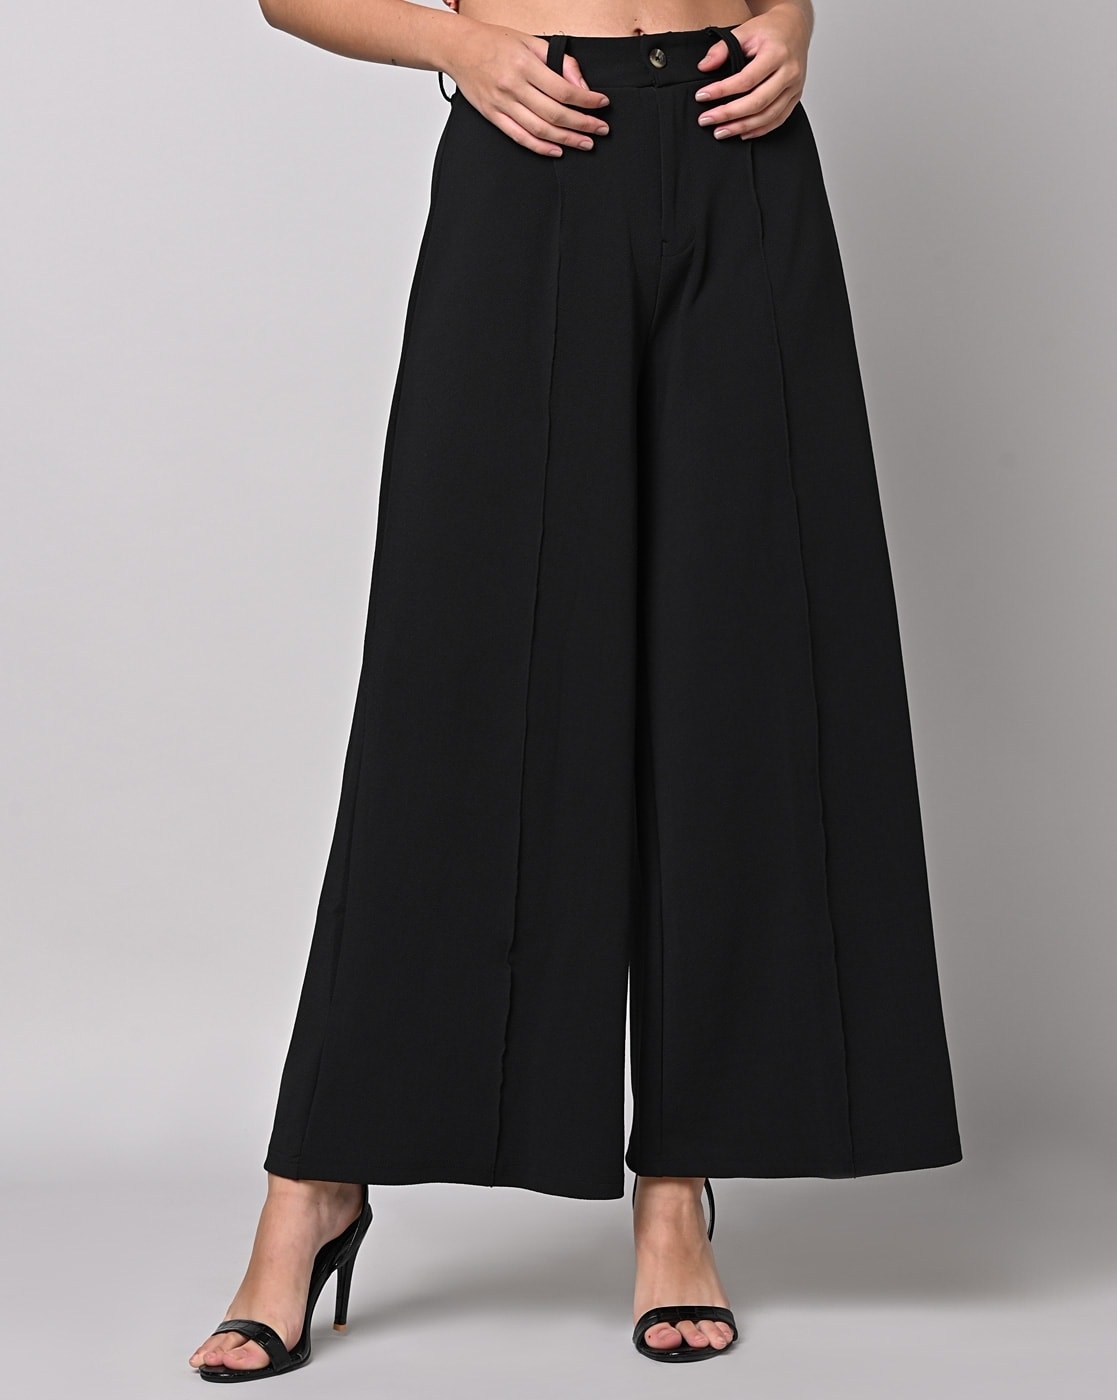 Formal Wear White Black Palazzo Pant For Women-2198 at Rs 180 in New Delhi